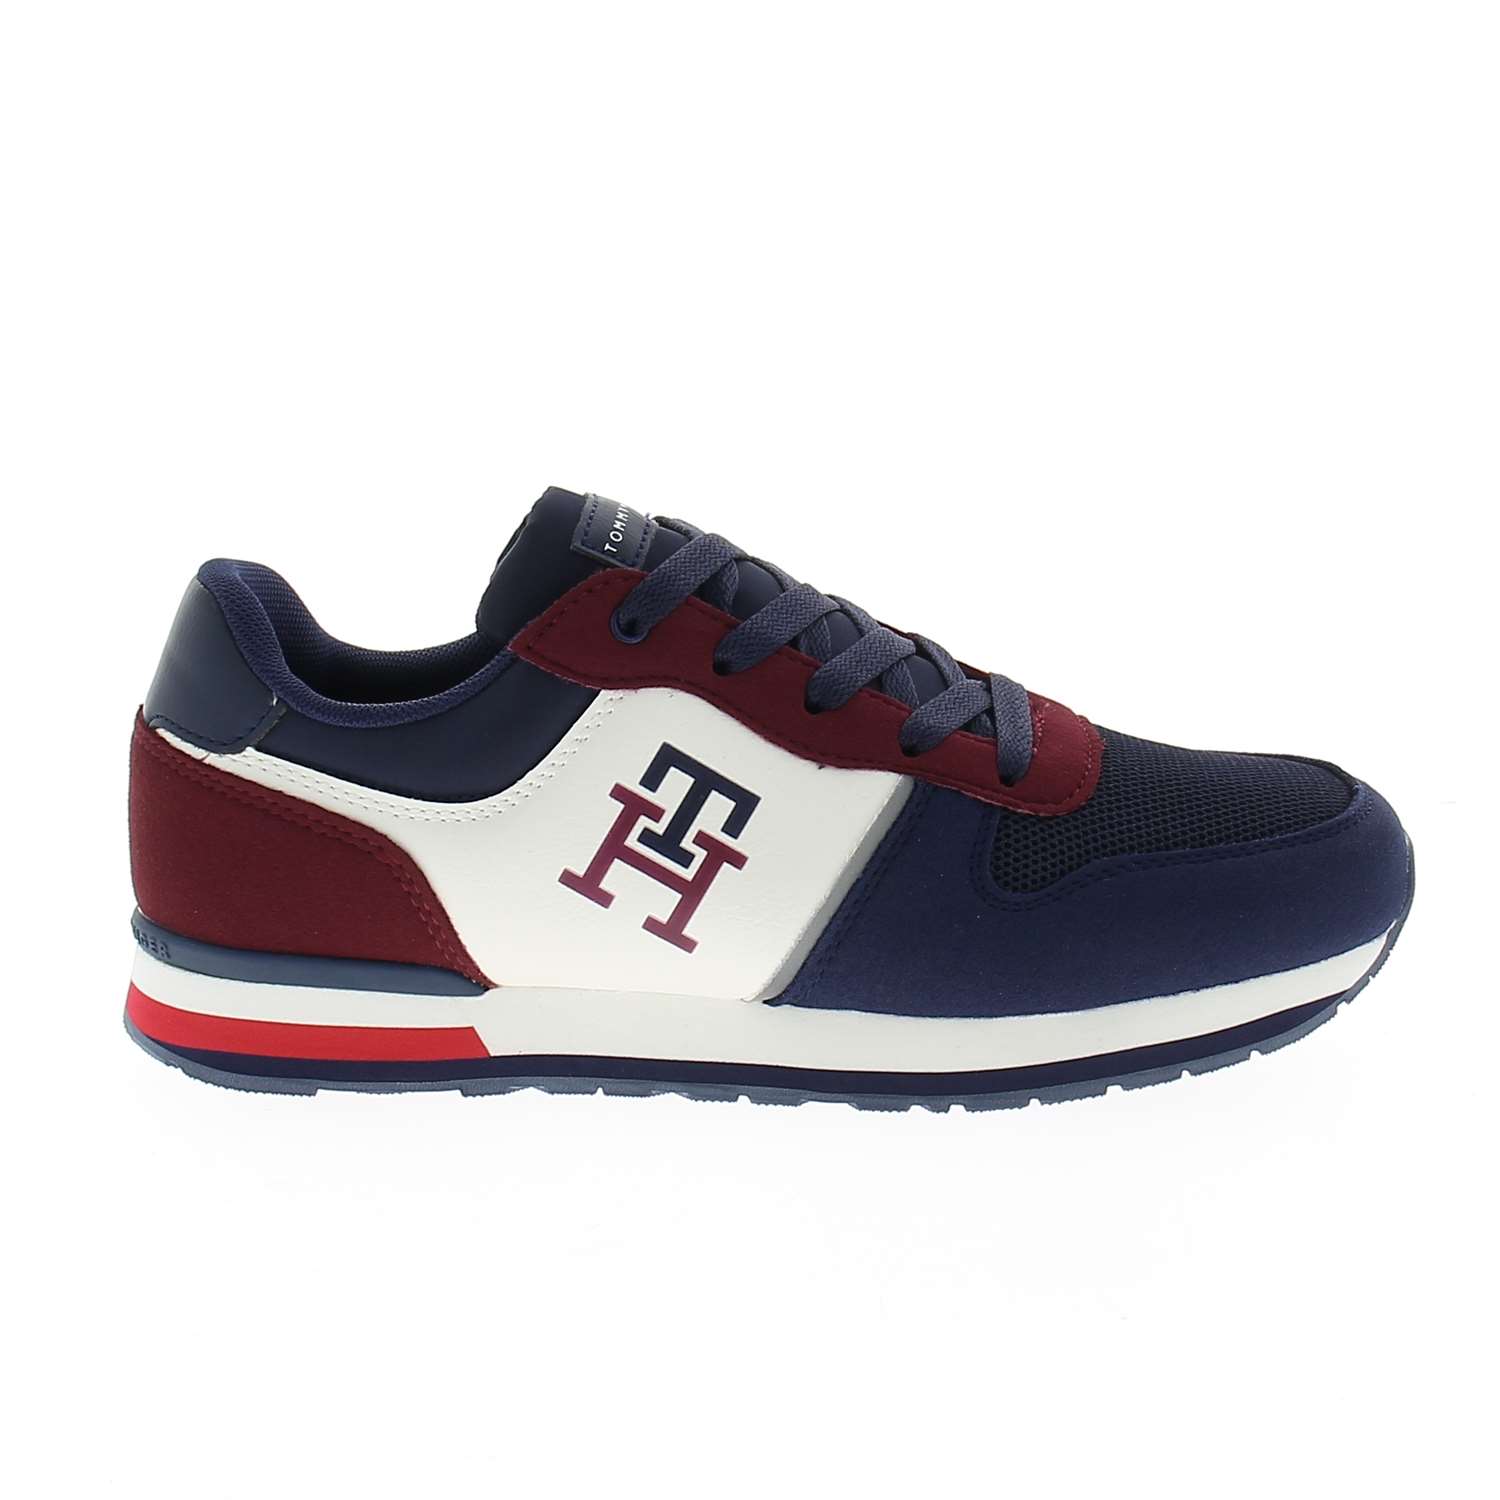 02 - NEWTON - TOMMY HILFIGER - Chaussures basses - Synthétique